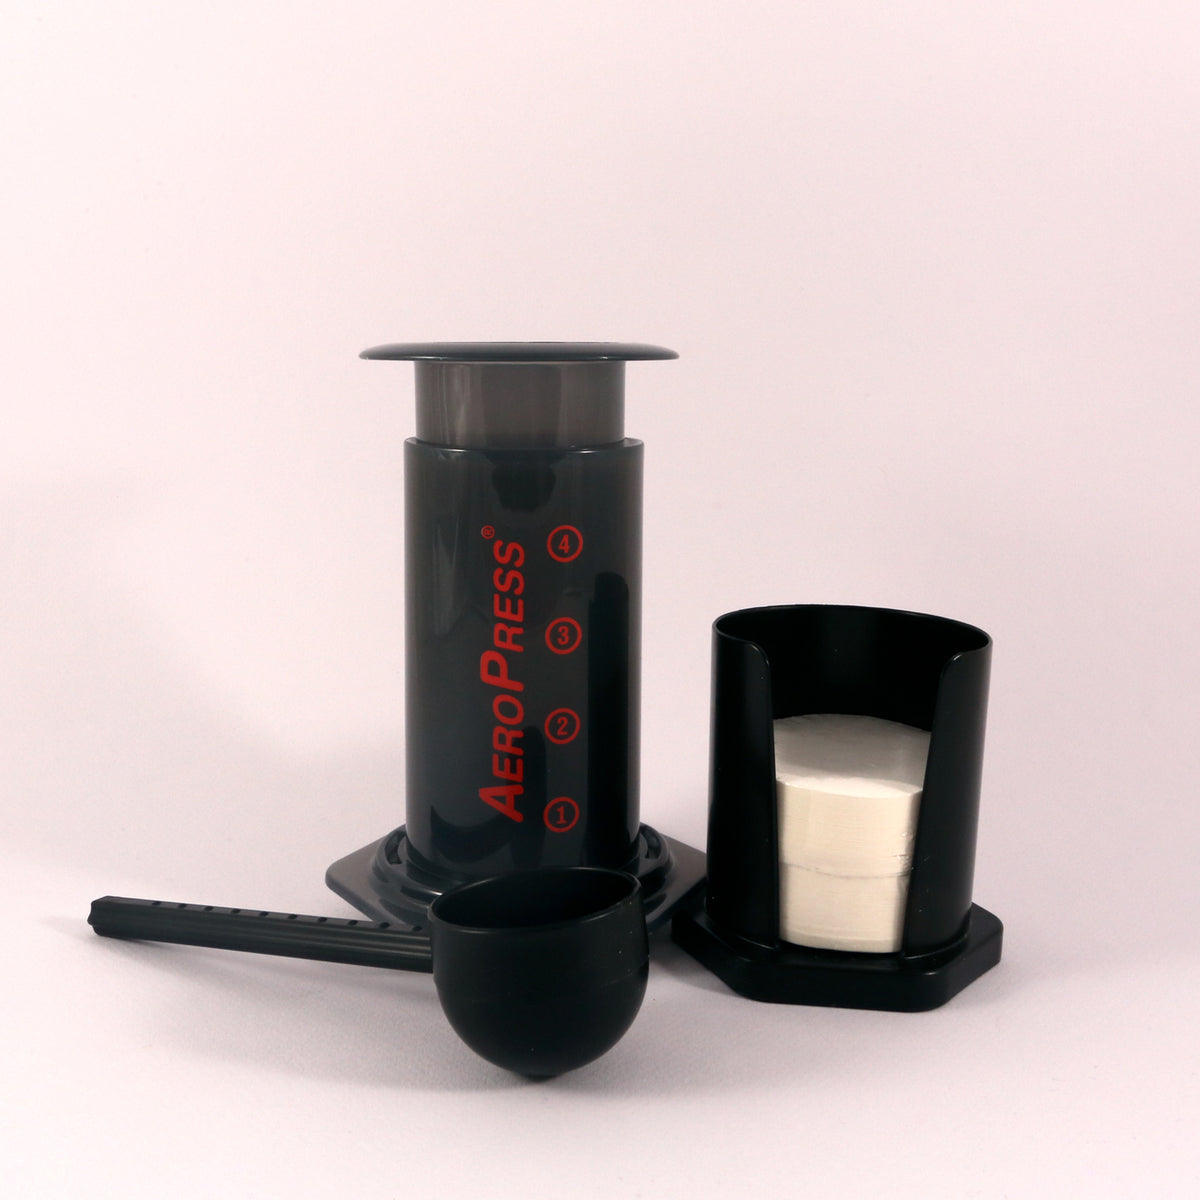 An Tandem aeropress coffee maker, touted as the world's greatest, with its components arranged neatly: the press, filter cap, scoop, and black funnel, against a light gray background.